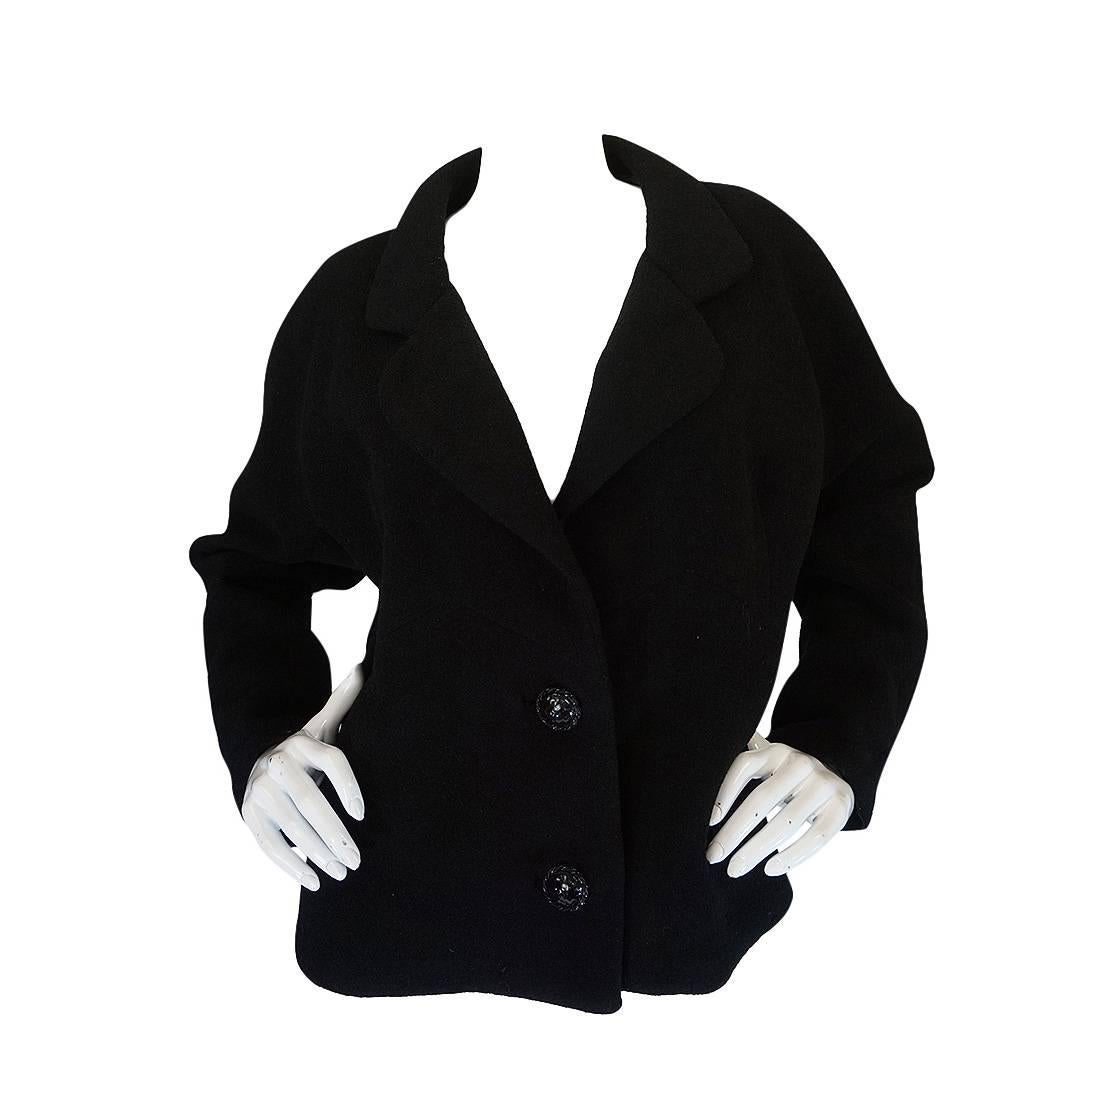 1950s Numbered Haute Couture Black Balenciaga Jacket